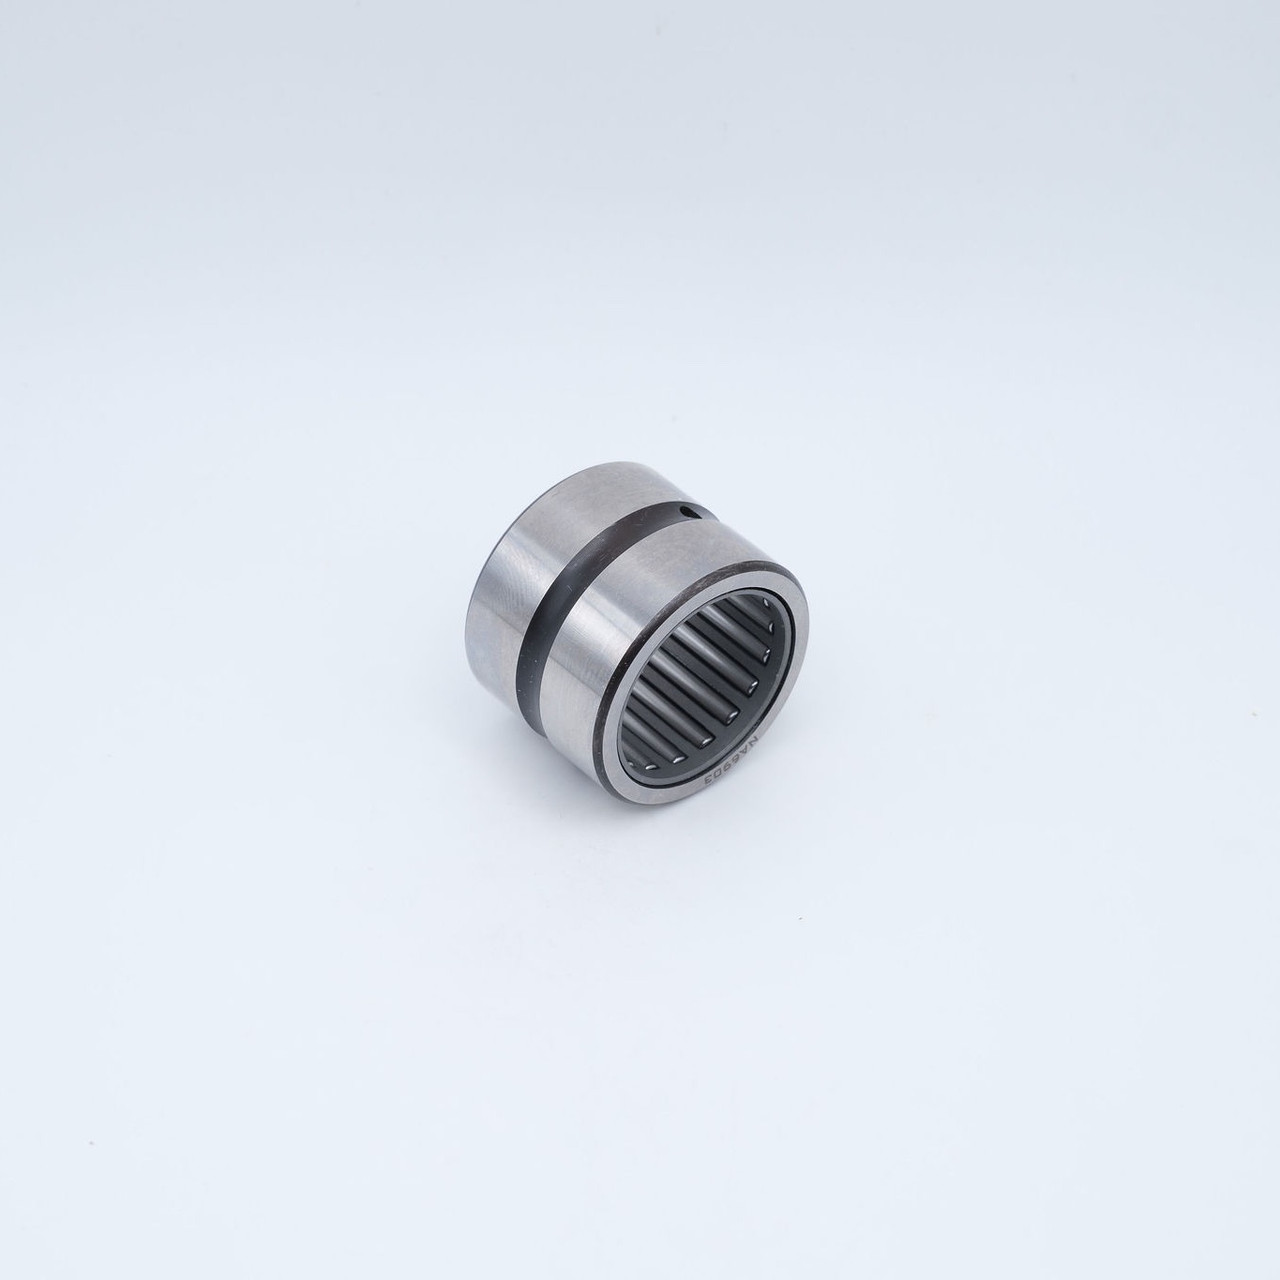 RNA6902 Machined Needle Roller 20x28x23 Angled View